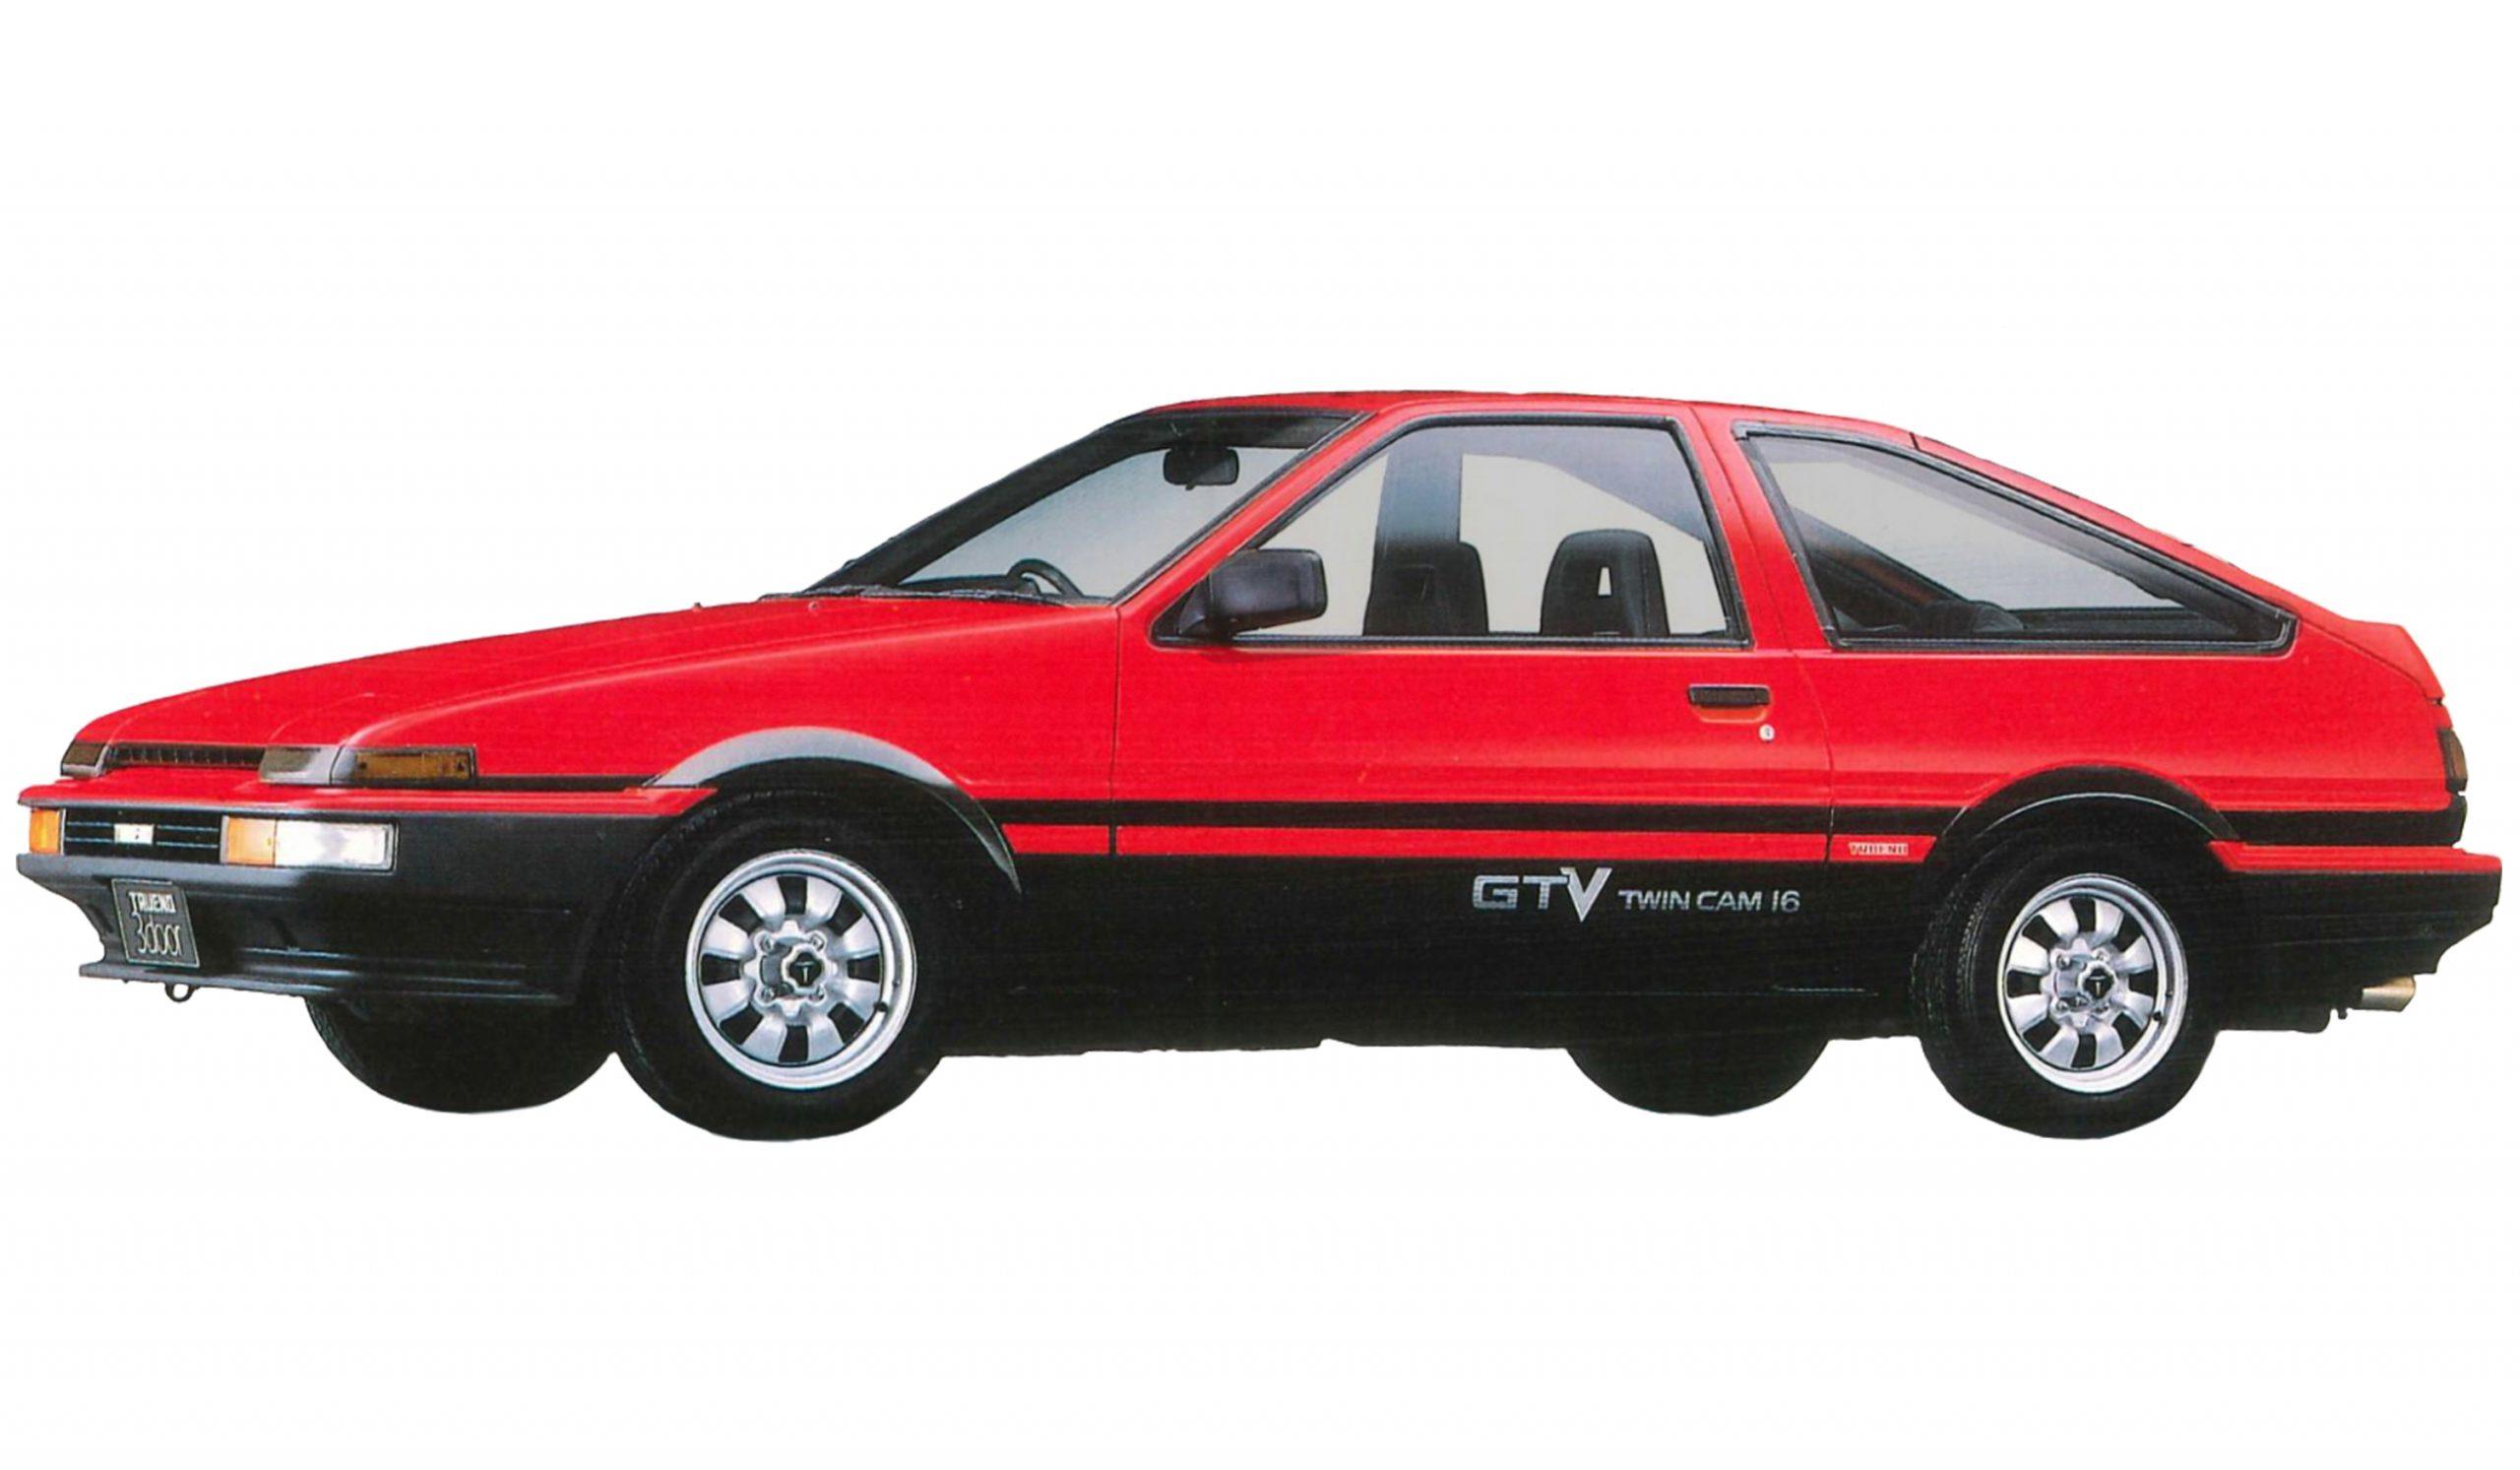 Toyota Gazoo Racing to produce Heritage Parts for legendary AE86 Corolla